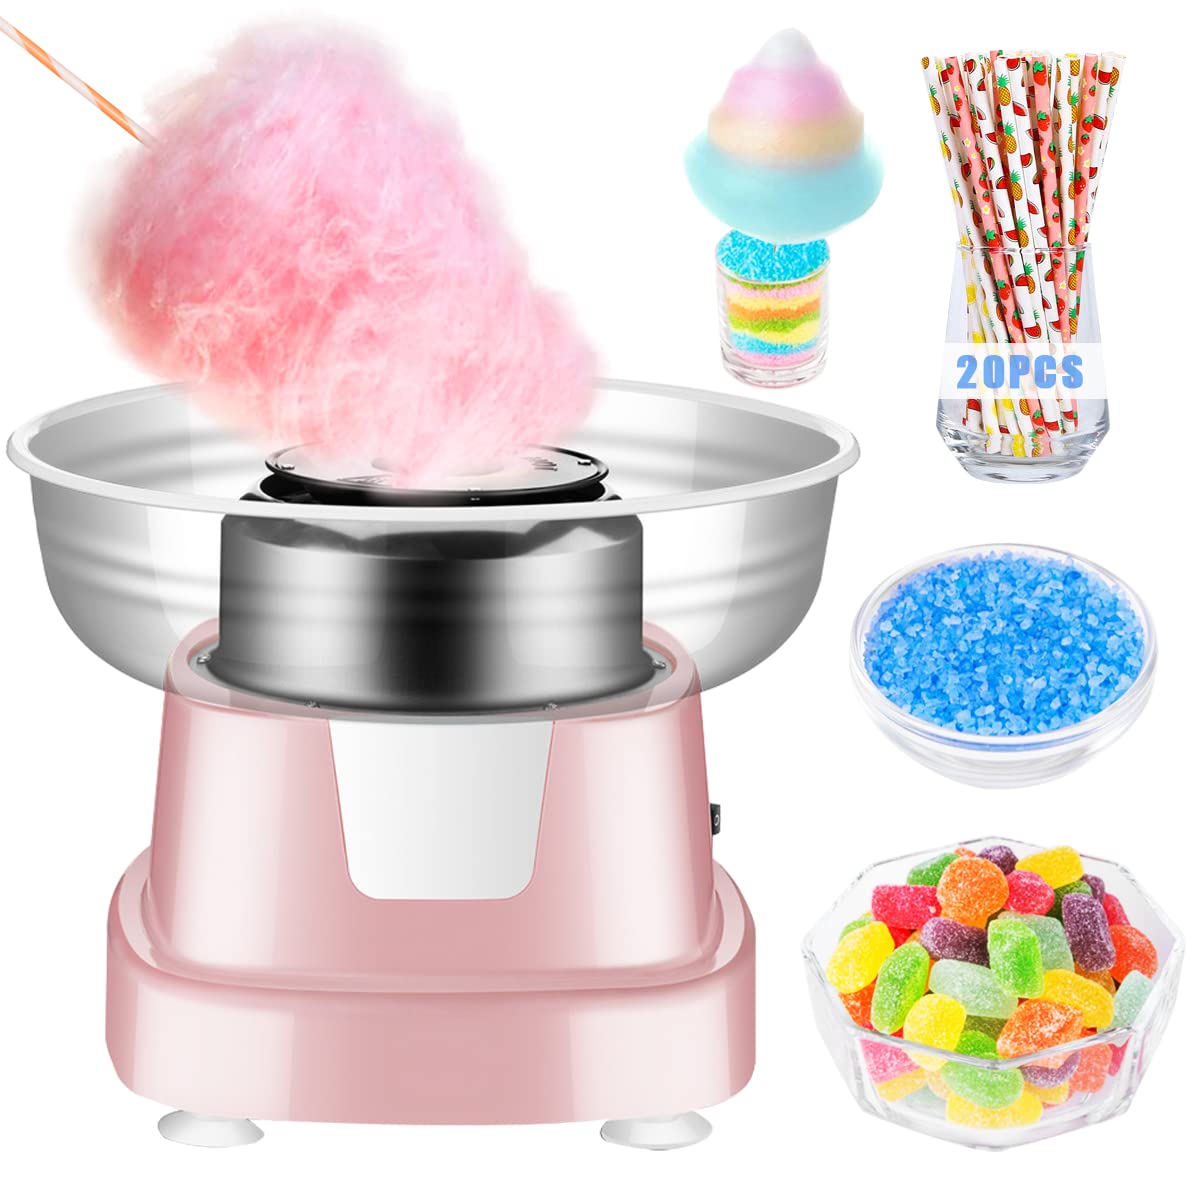 OuYteu cotton candy Machine for Kids, Electric cotton candy Maker with Large Food grade Splash-Proof Plate, Kids Favorite, for Home Bir